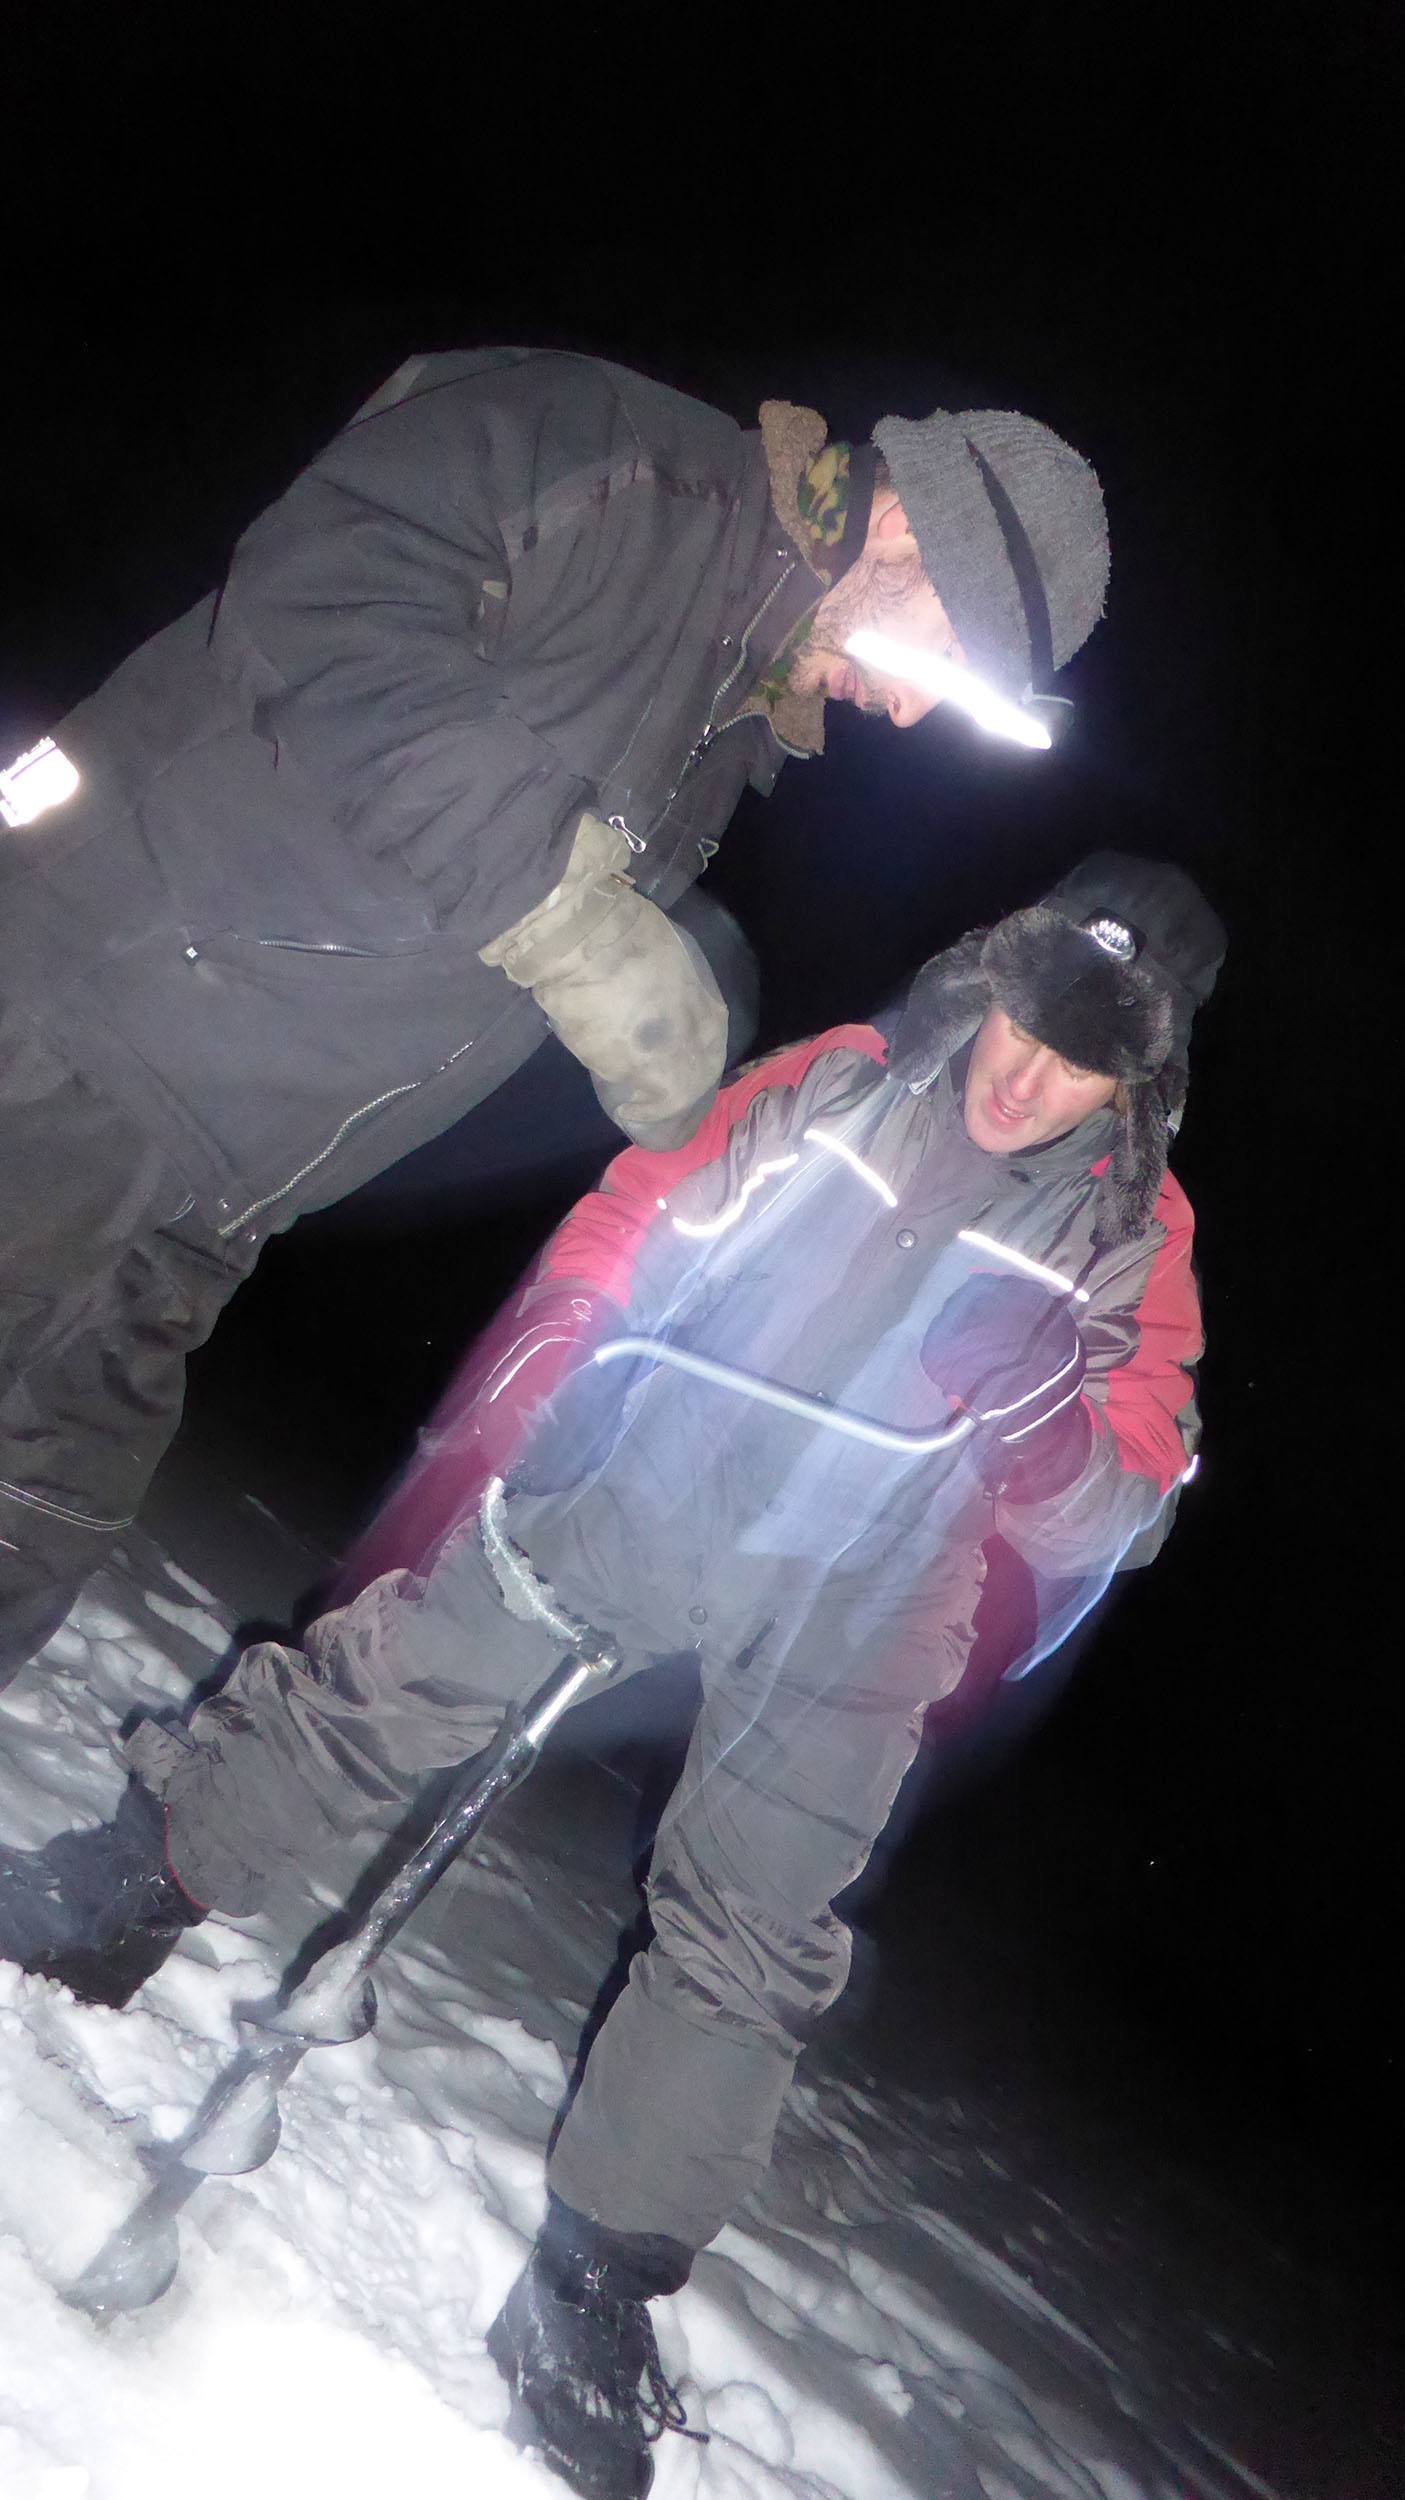 Camp Alta host instructing Ben how to drill through the ice Sweden